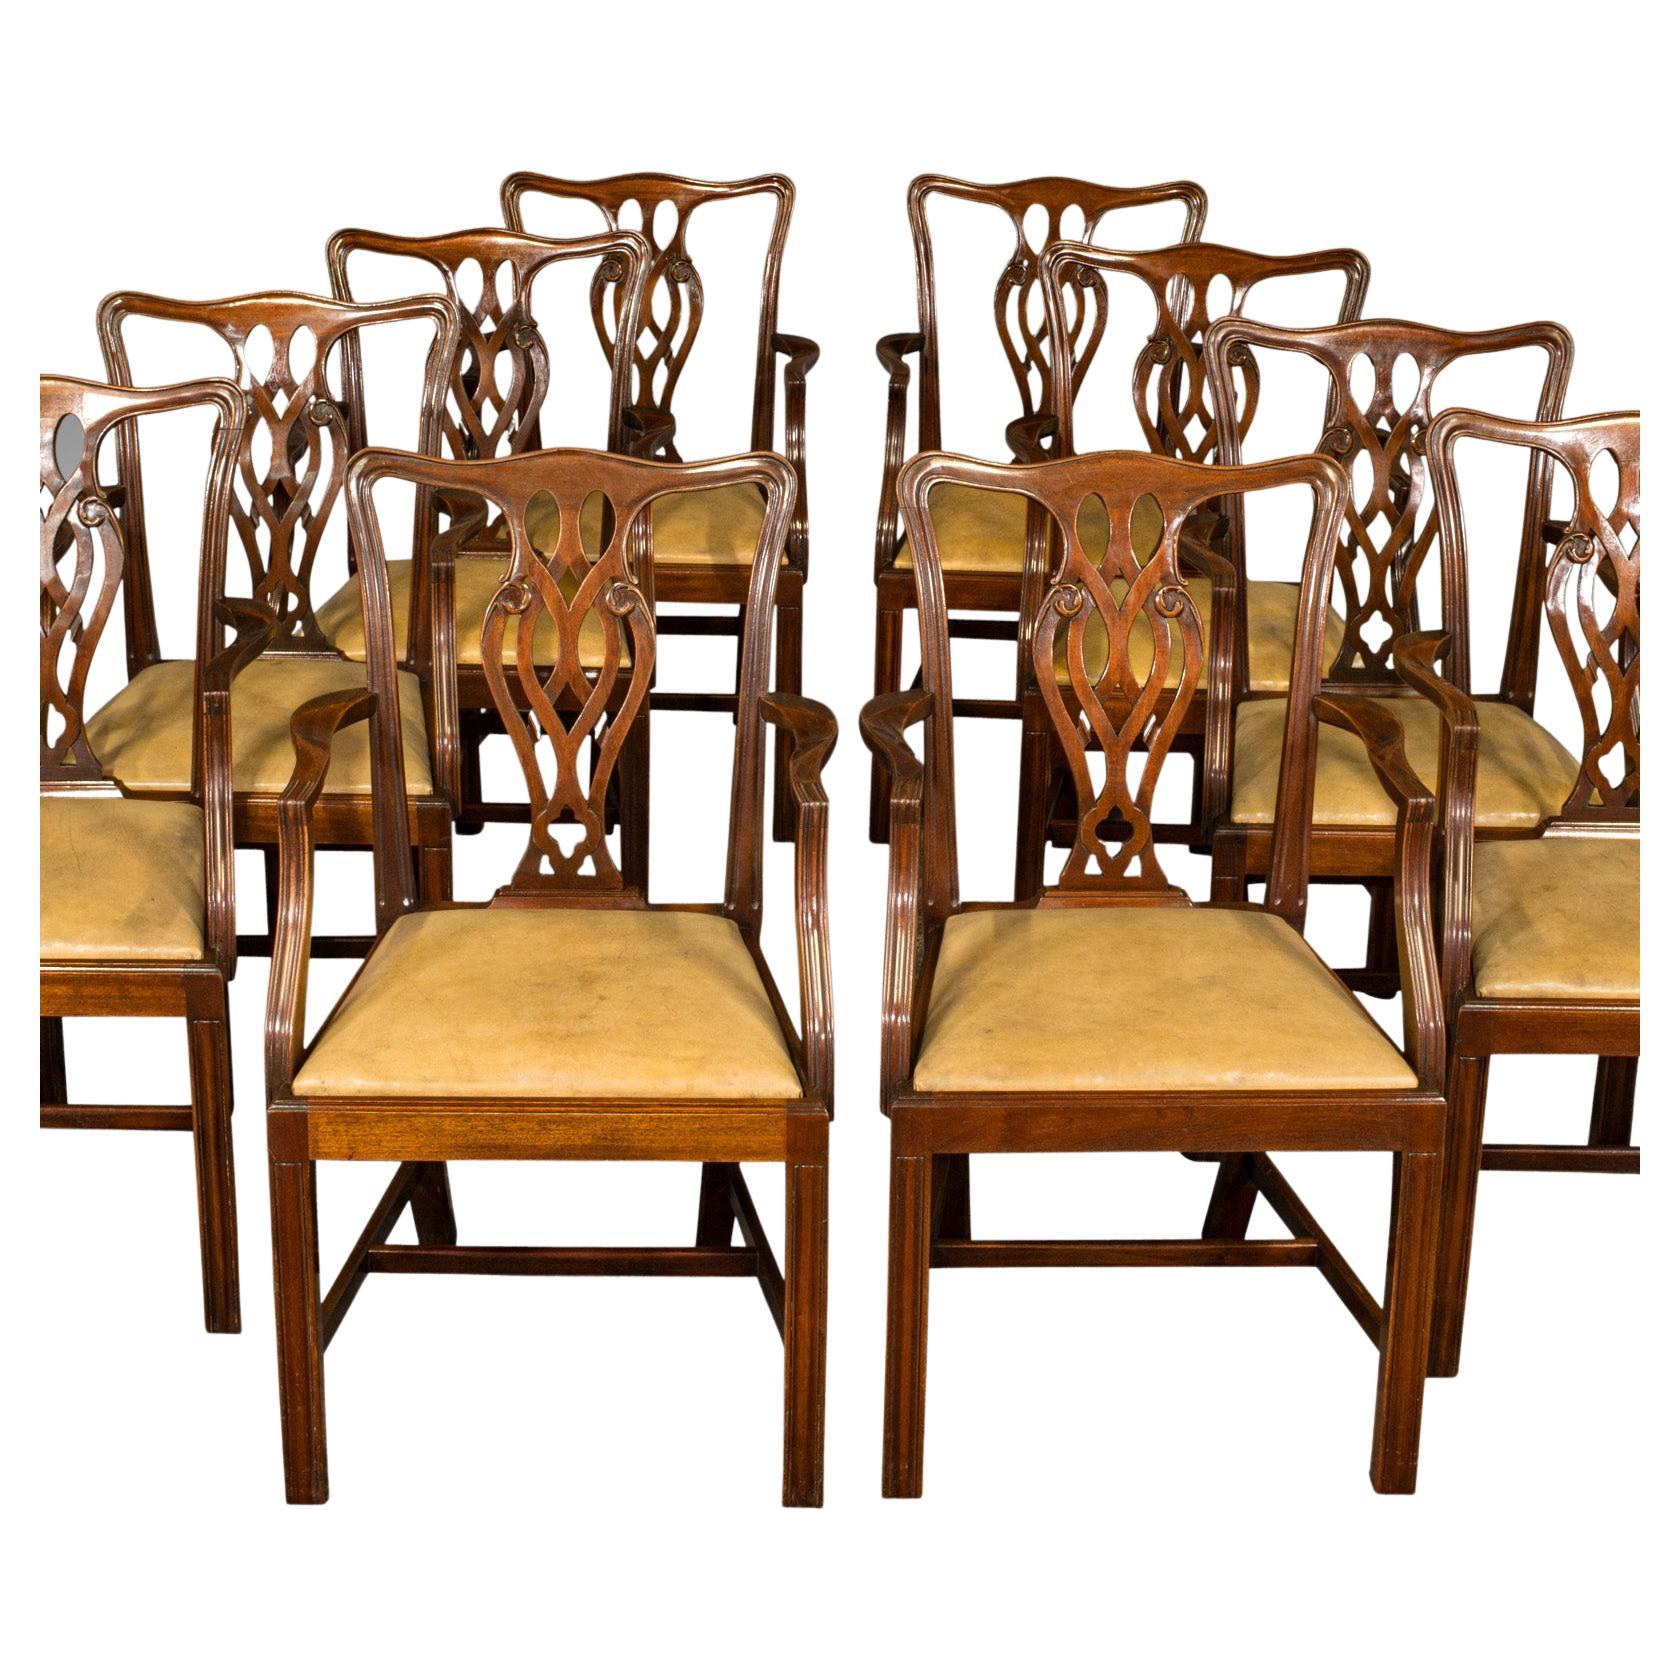 Set of 10 Antique Carver Dining Chairs, English, Chippendale Revival, Victorian